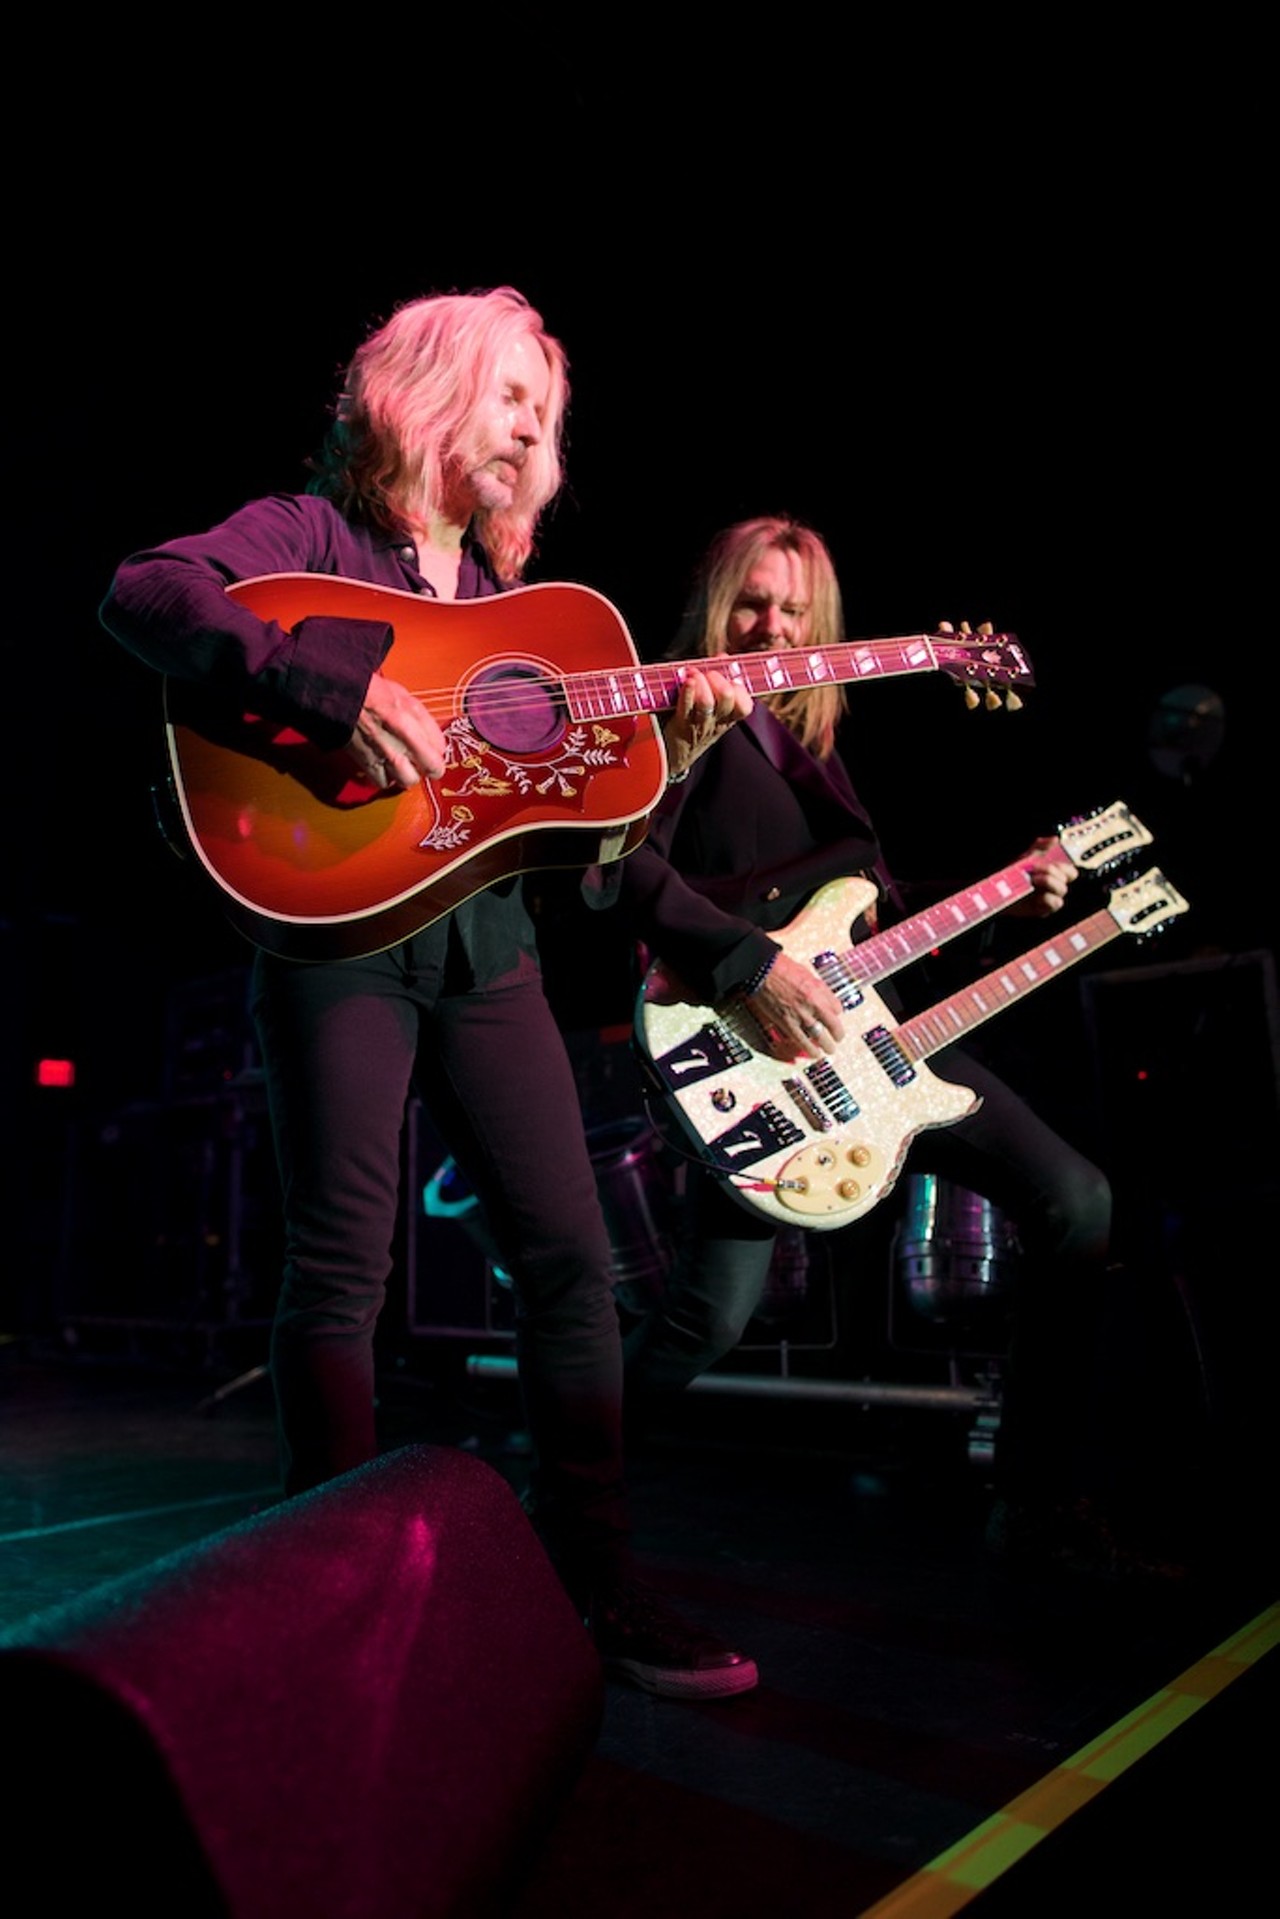 Styx Performing at Hard Rock Live